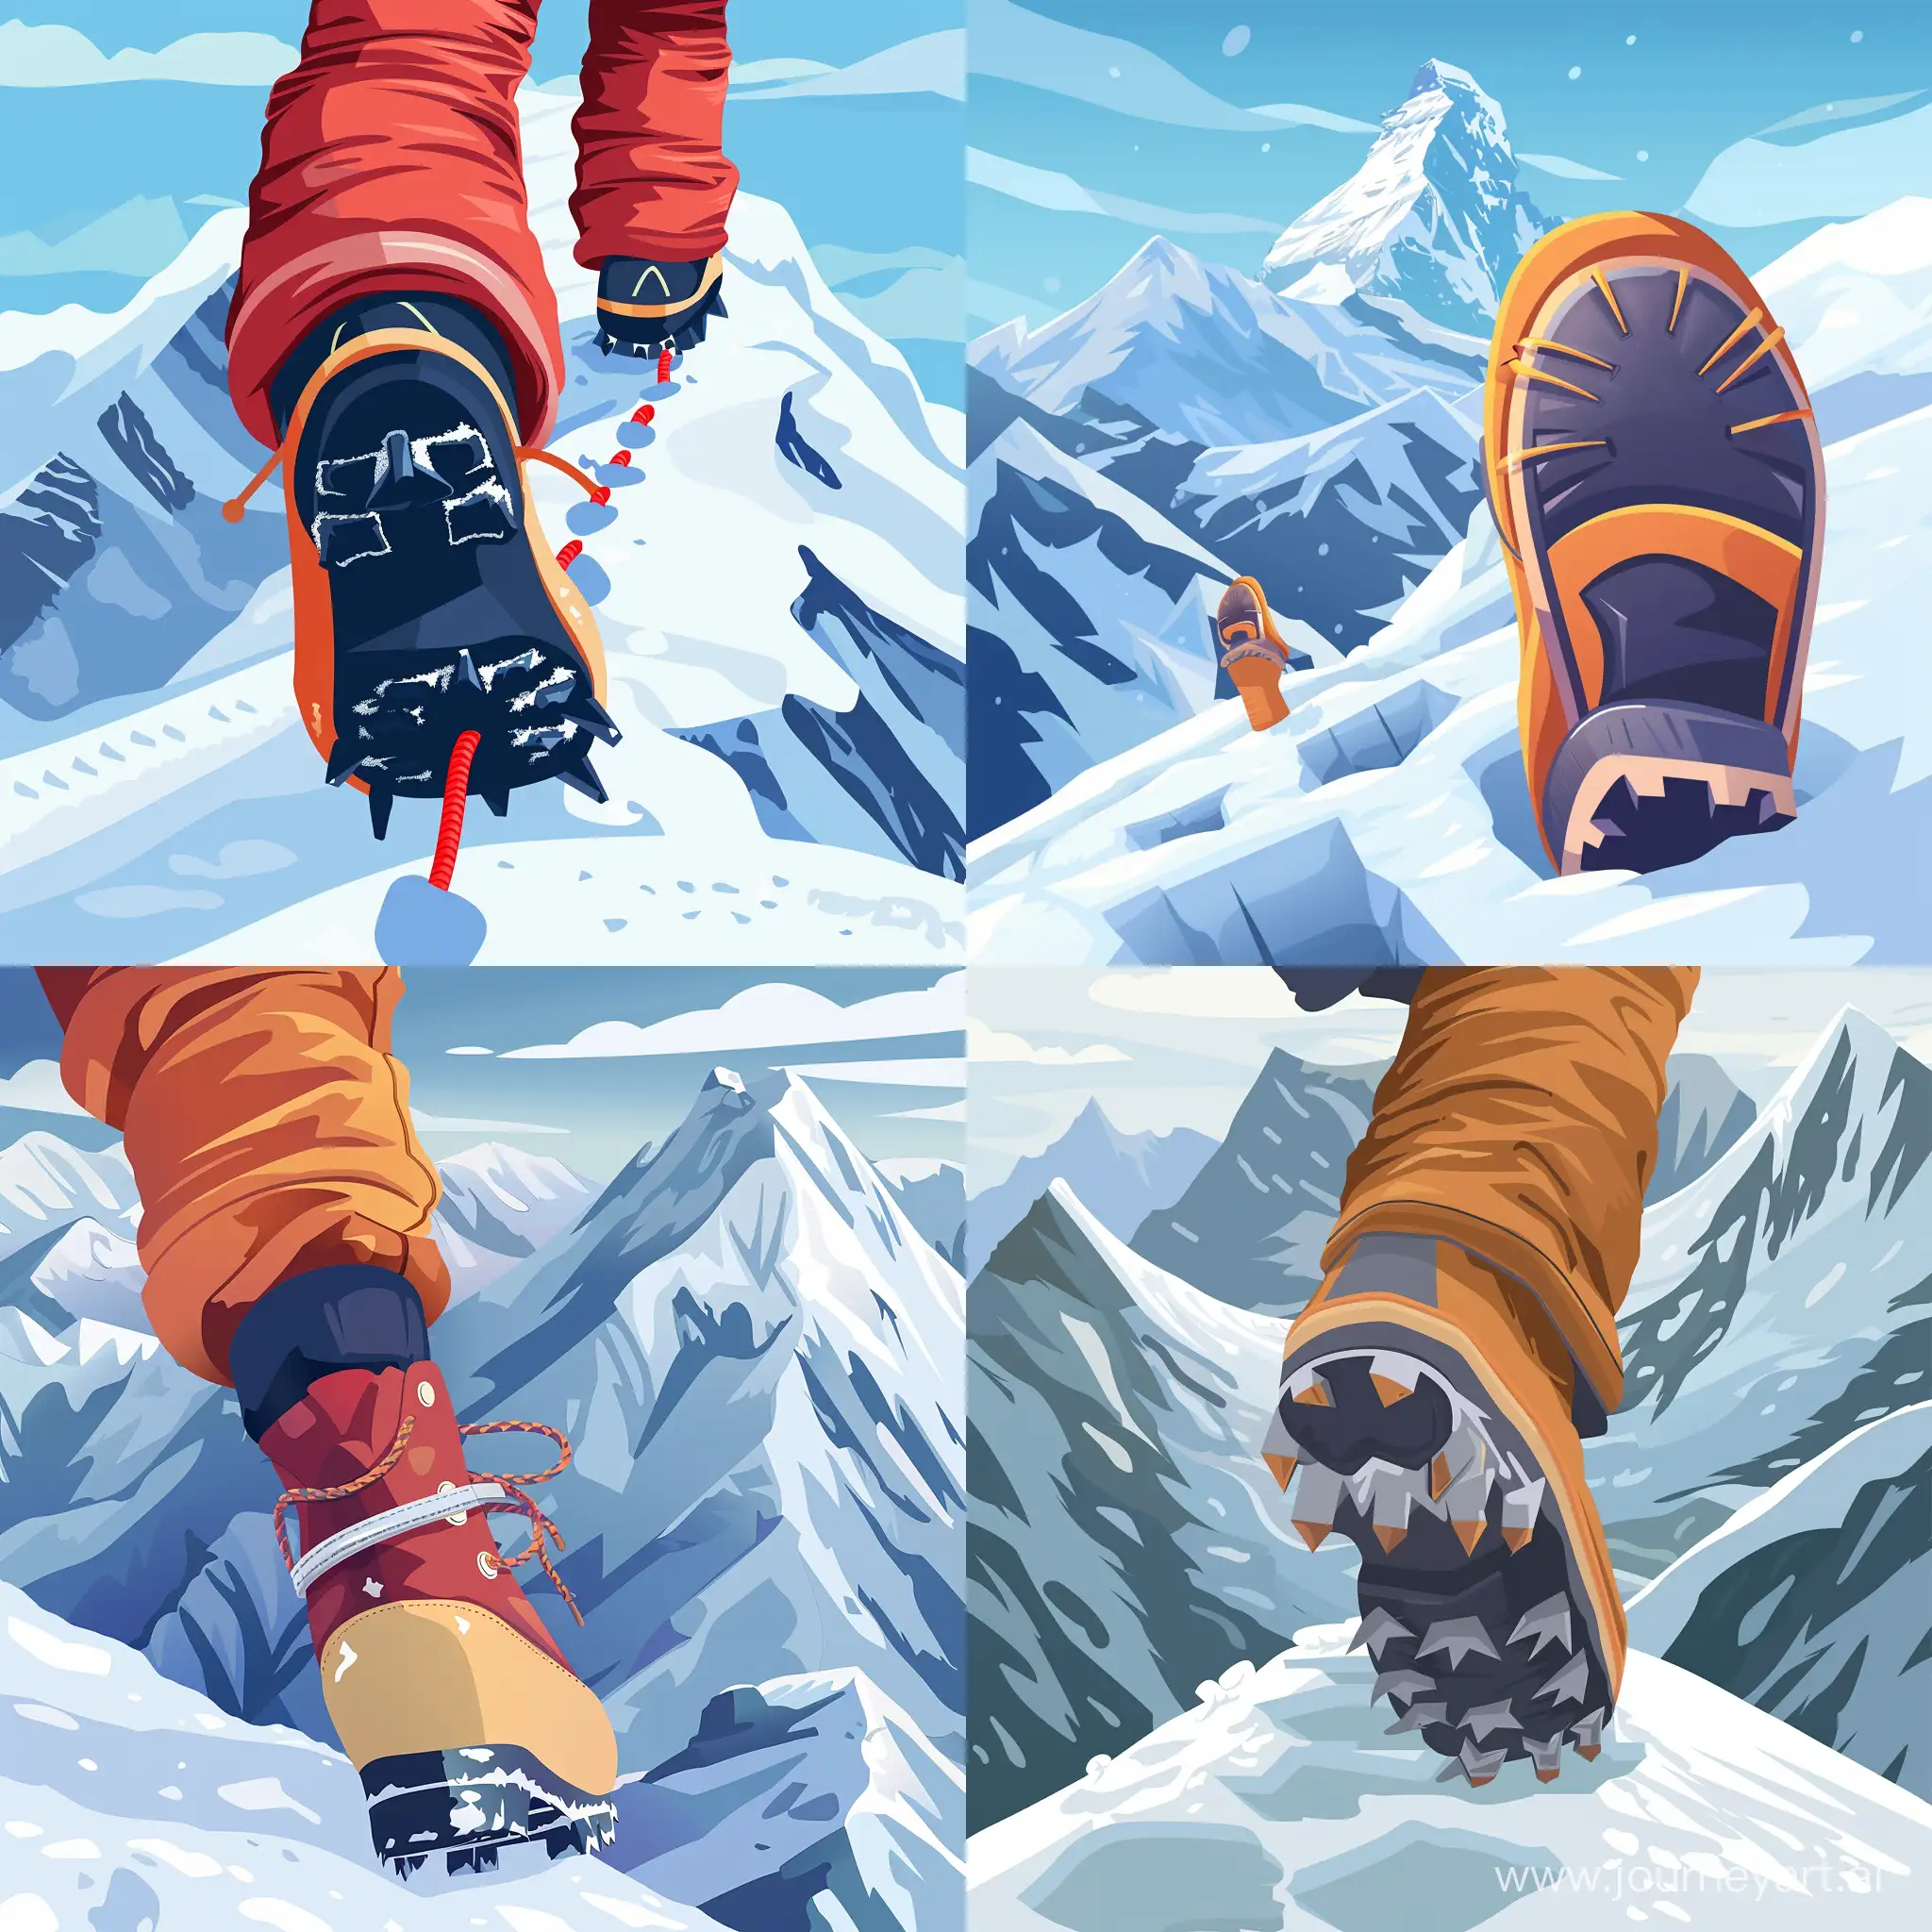 cartoon illustration of a mountaineer' foot, mountaineer's point of view while climbing up mount everest, taking the next step, cold environment, in flat style